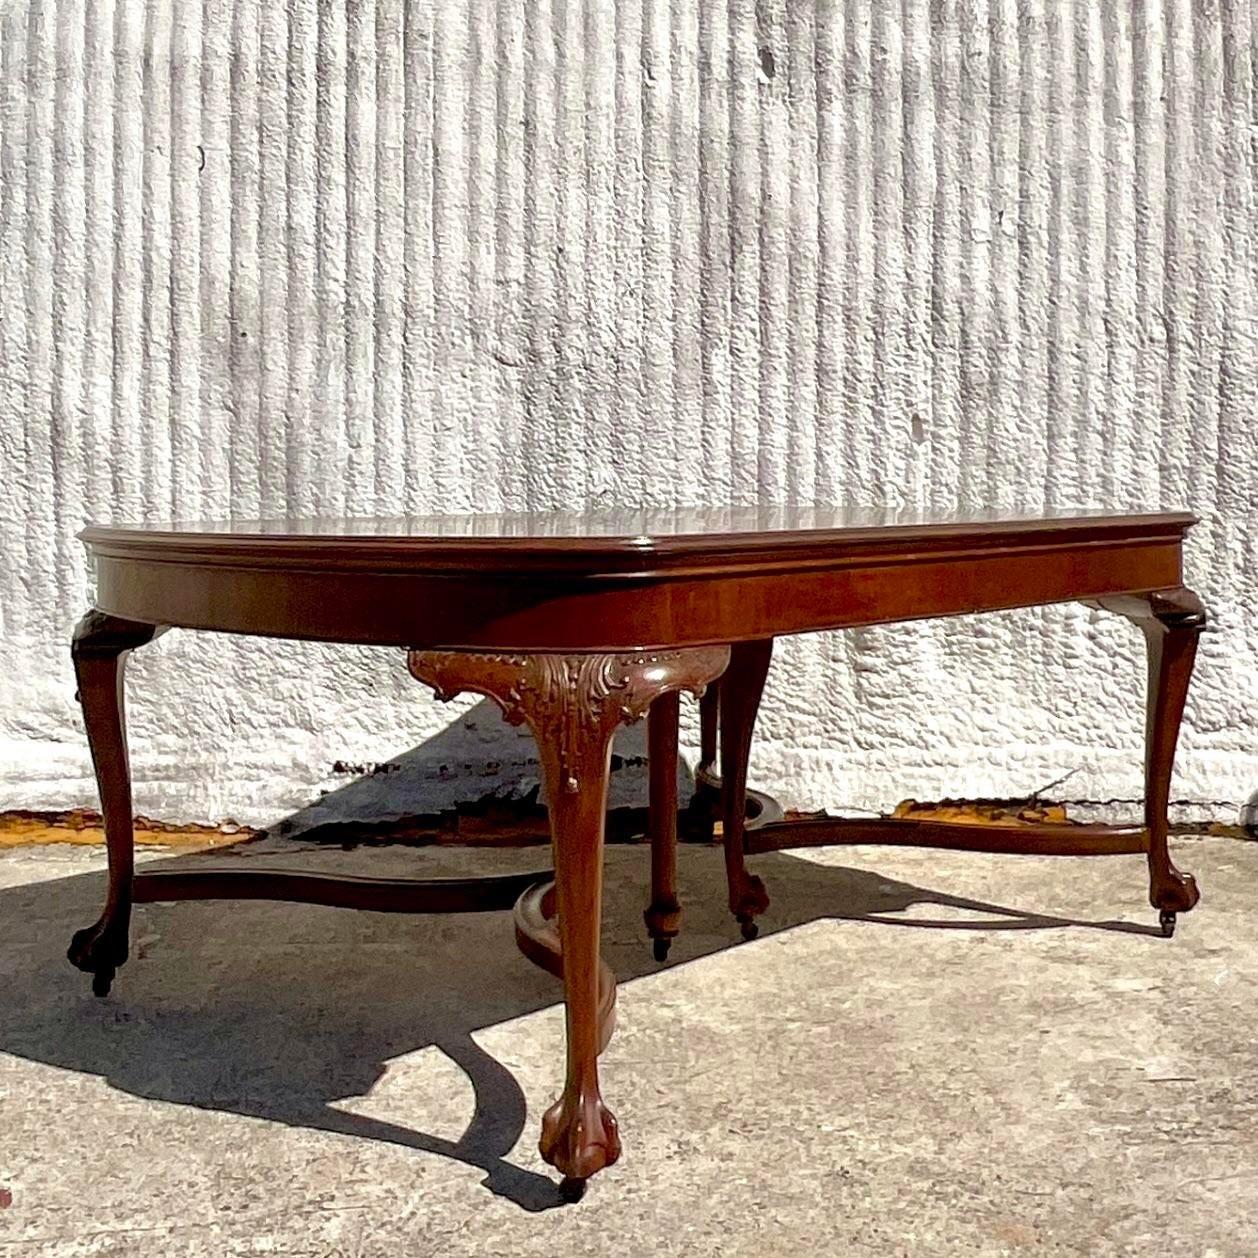 A stunning vintage Regency dining table. A chic Queen Anne shape with gorgeous hand carved Cabriolet legs. 4 additional leaves brings the total table length to a possible 118. Great for entertaining. Acquired from a Palm Beach estate.